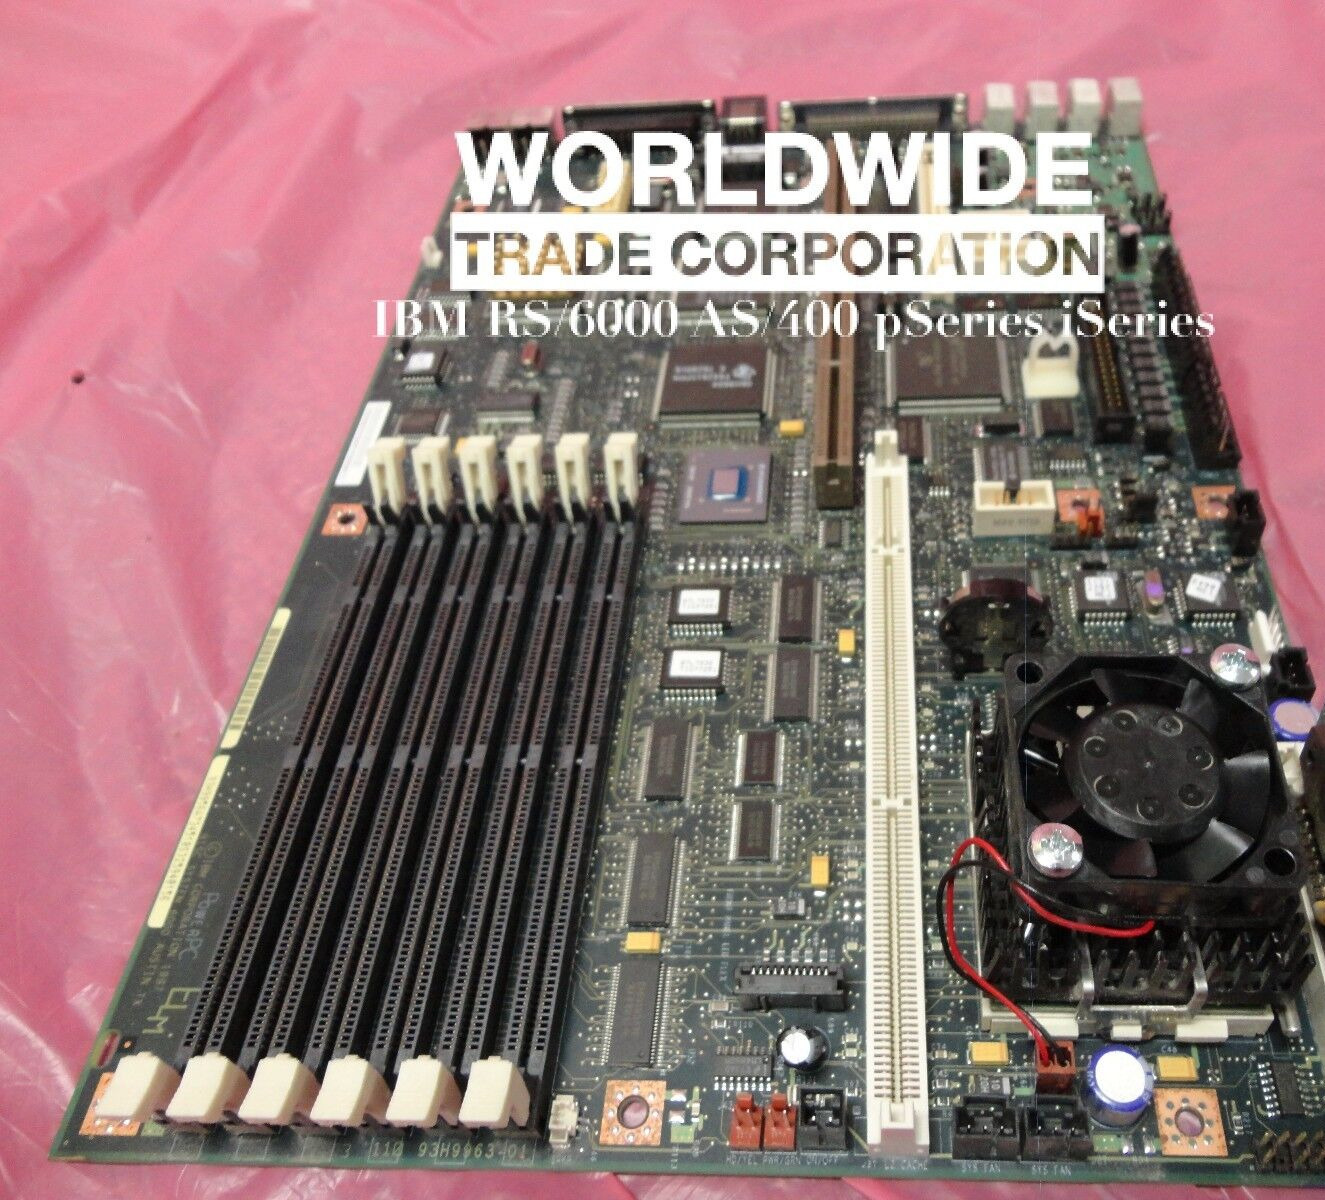 IBM 4347 93H9334 PowerPC 604e 332MHz System Board for 7043-140 pSeries 